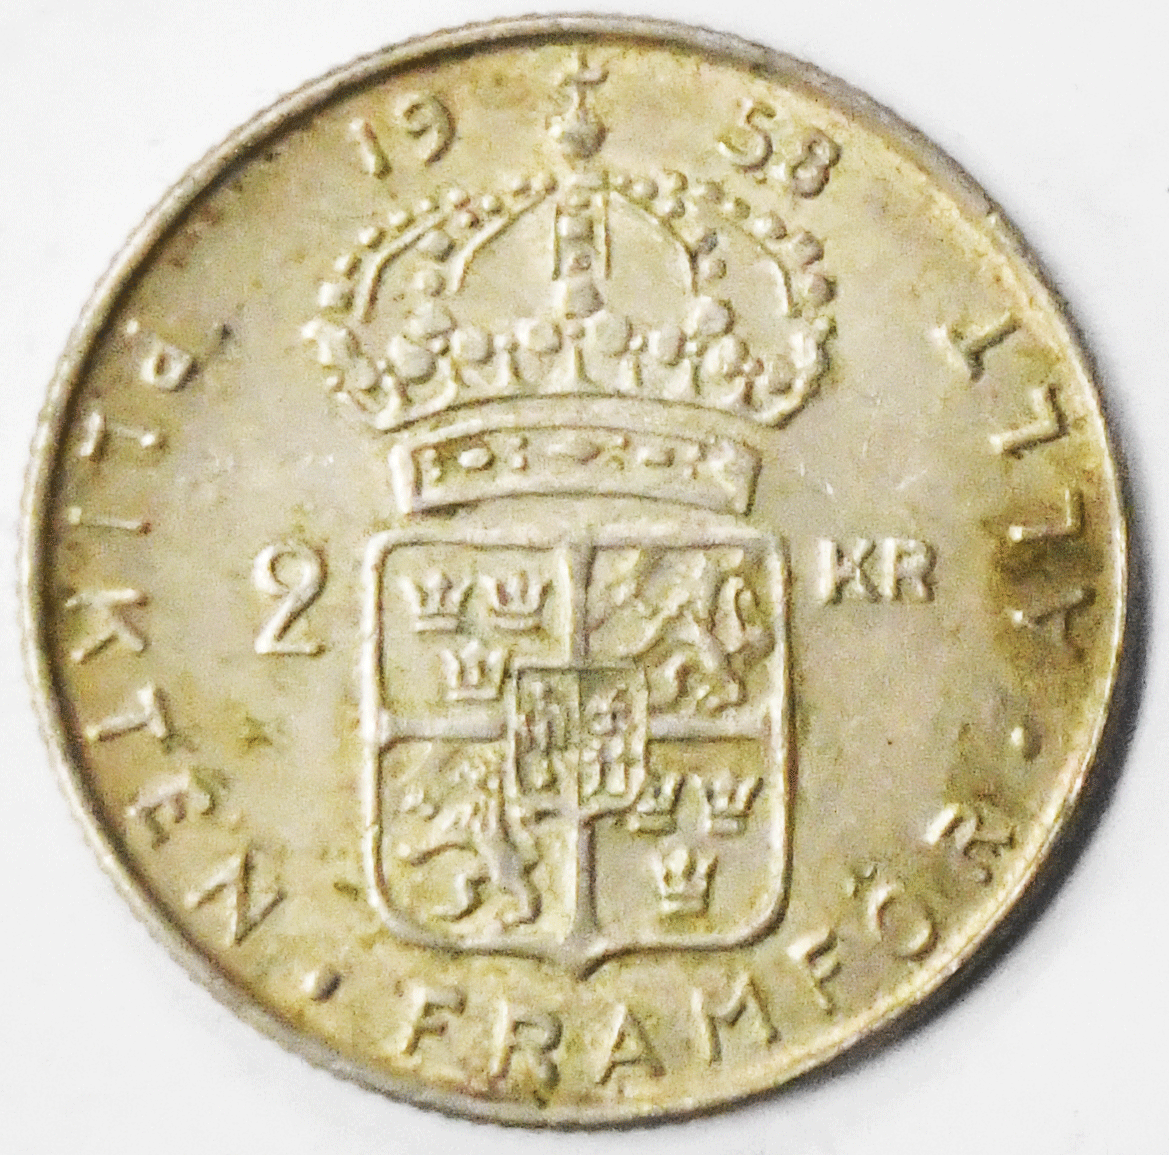 1958 TS Sweden 2 Two Kronor Silver Coin KM# 827